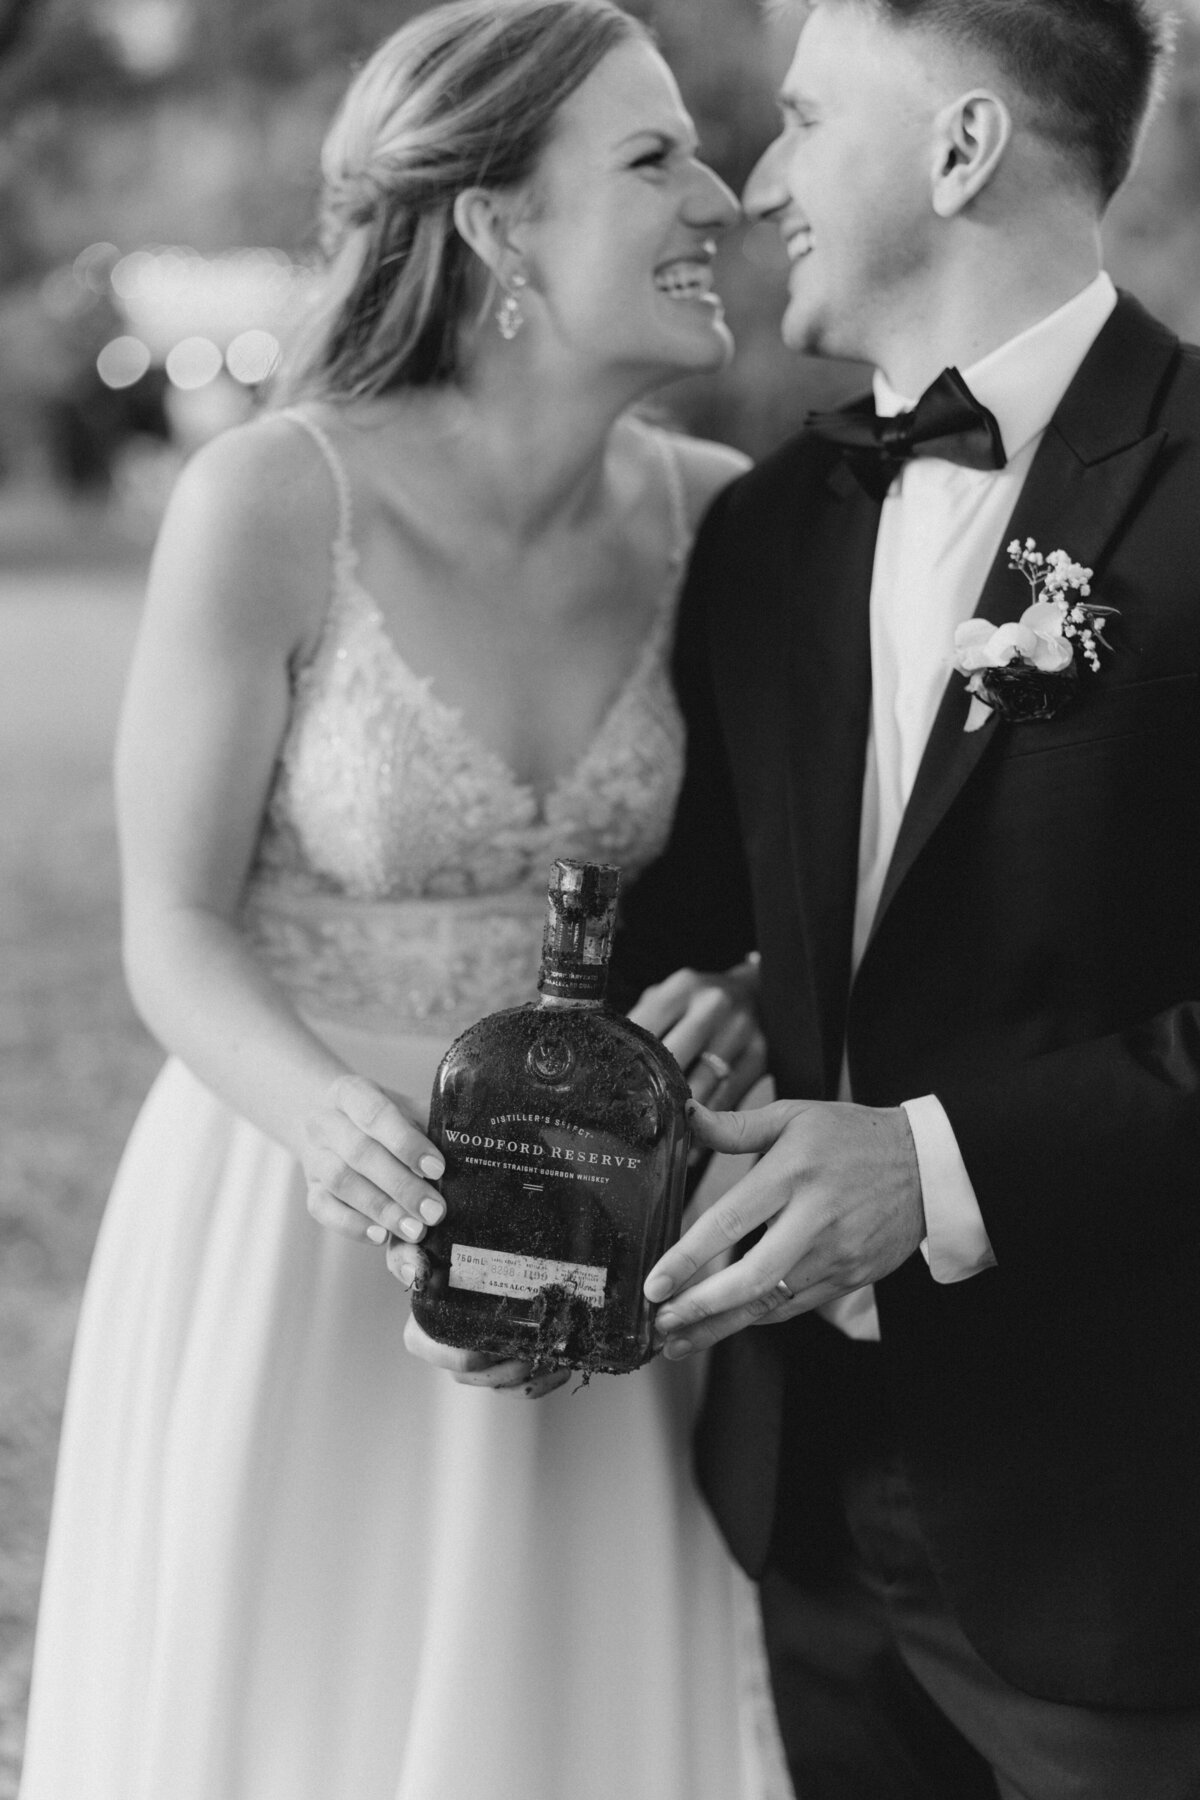 Southern tradition of burying the bourbon brings good weather on your wedding day. Bride and groom hold dirt covered bottle of bourbon and smile at each other. Charleston based black and white wedding photographer.